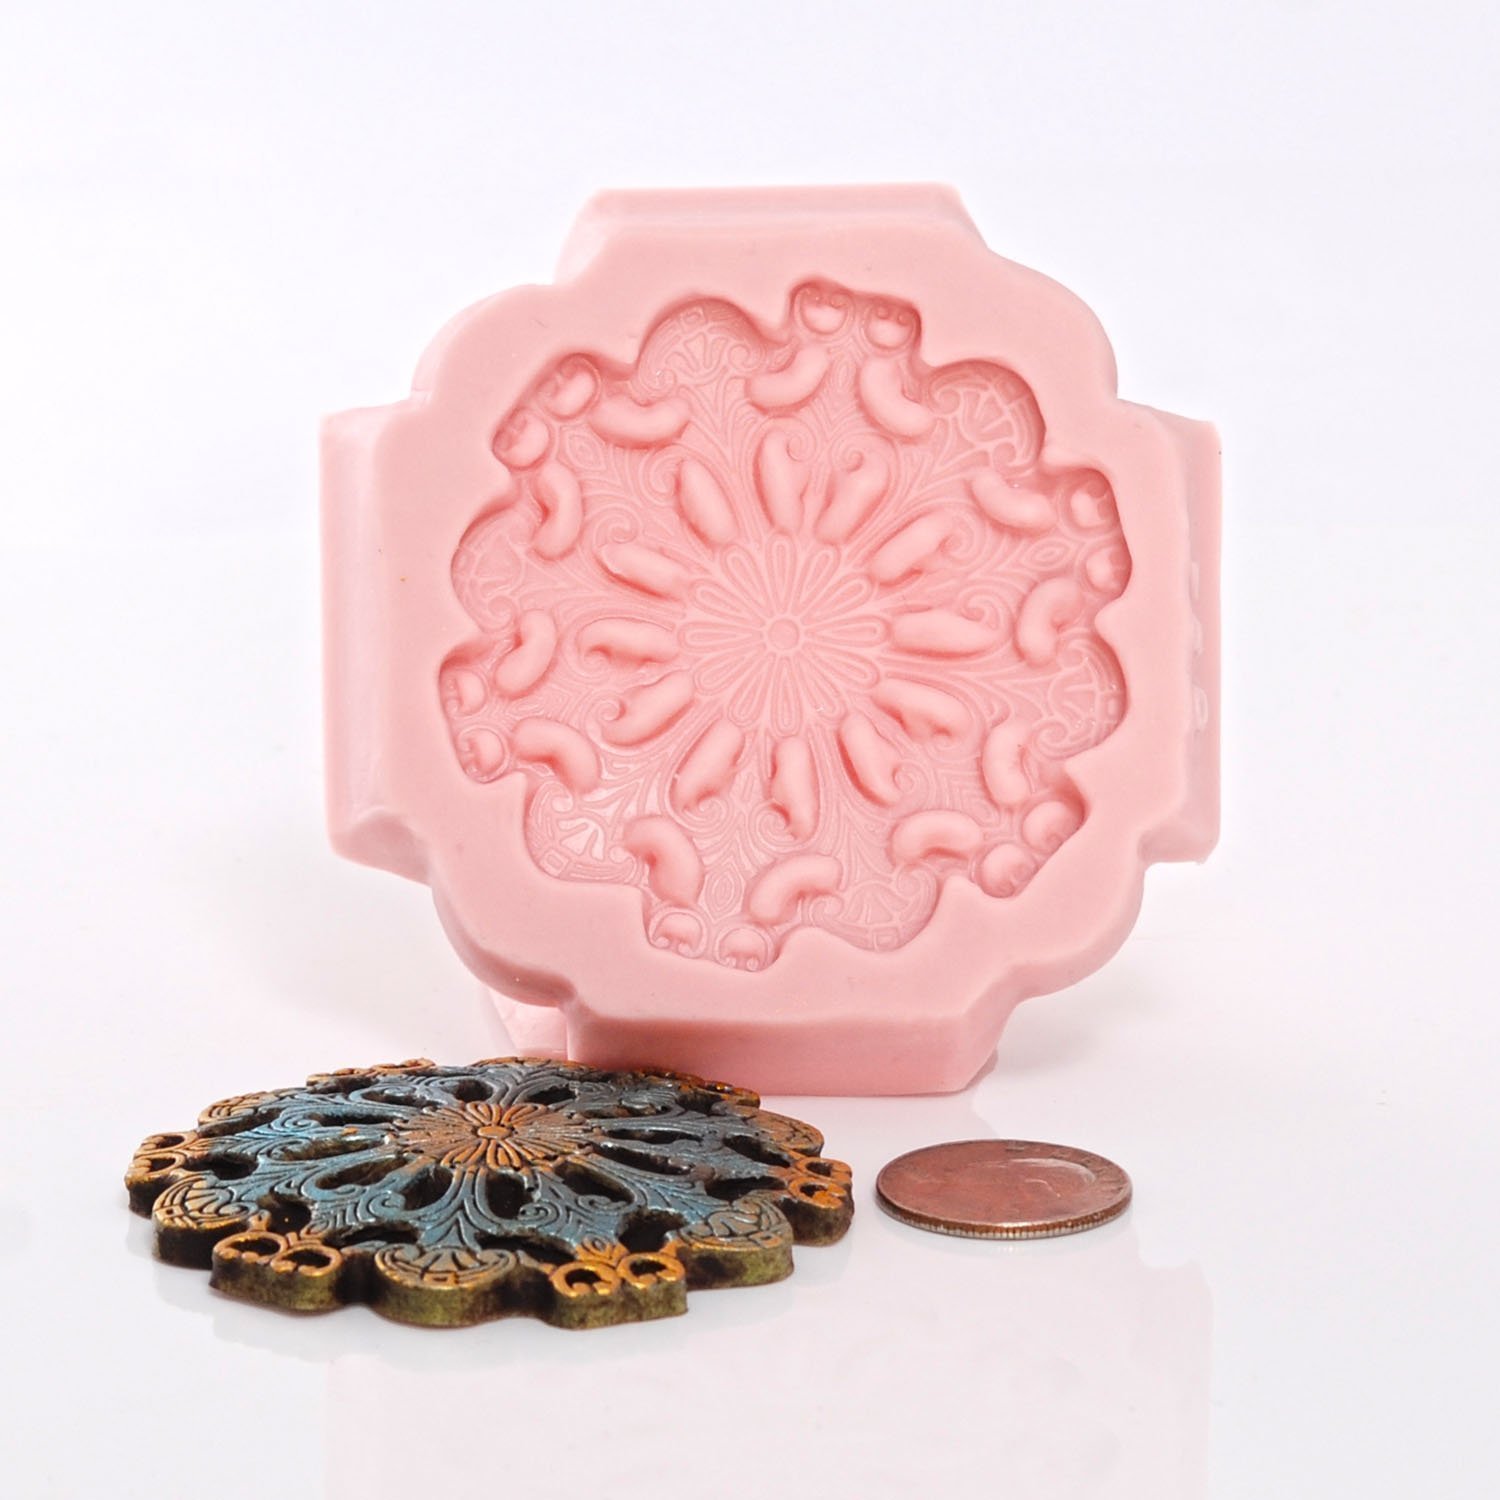 Round Steampunk Medallion Mold Easy To Use Flexible Silicone Food Safe Fondant, Chocolate, Candy, Resin, Polymer Clay Push Mold.